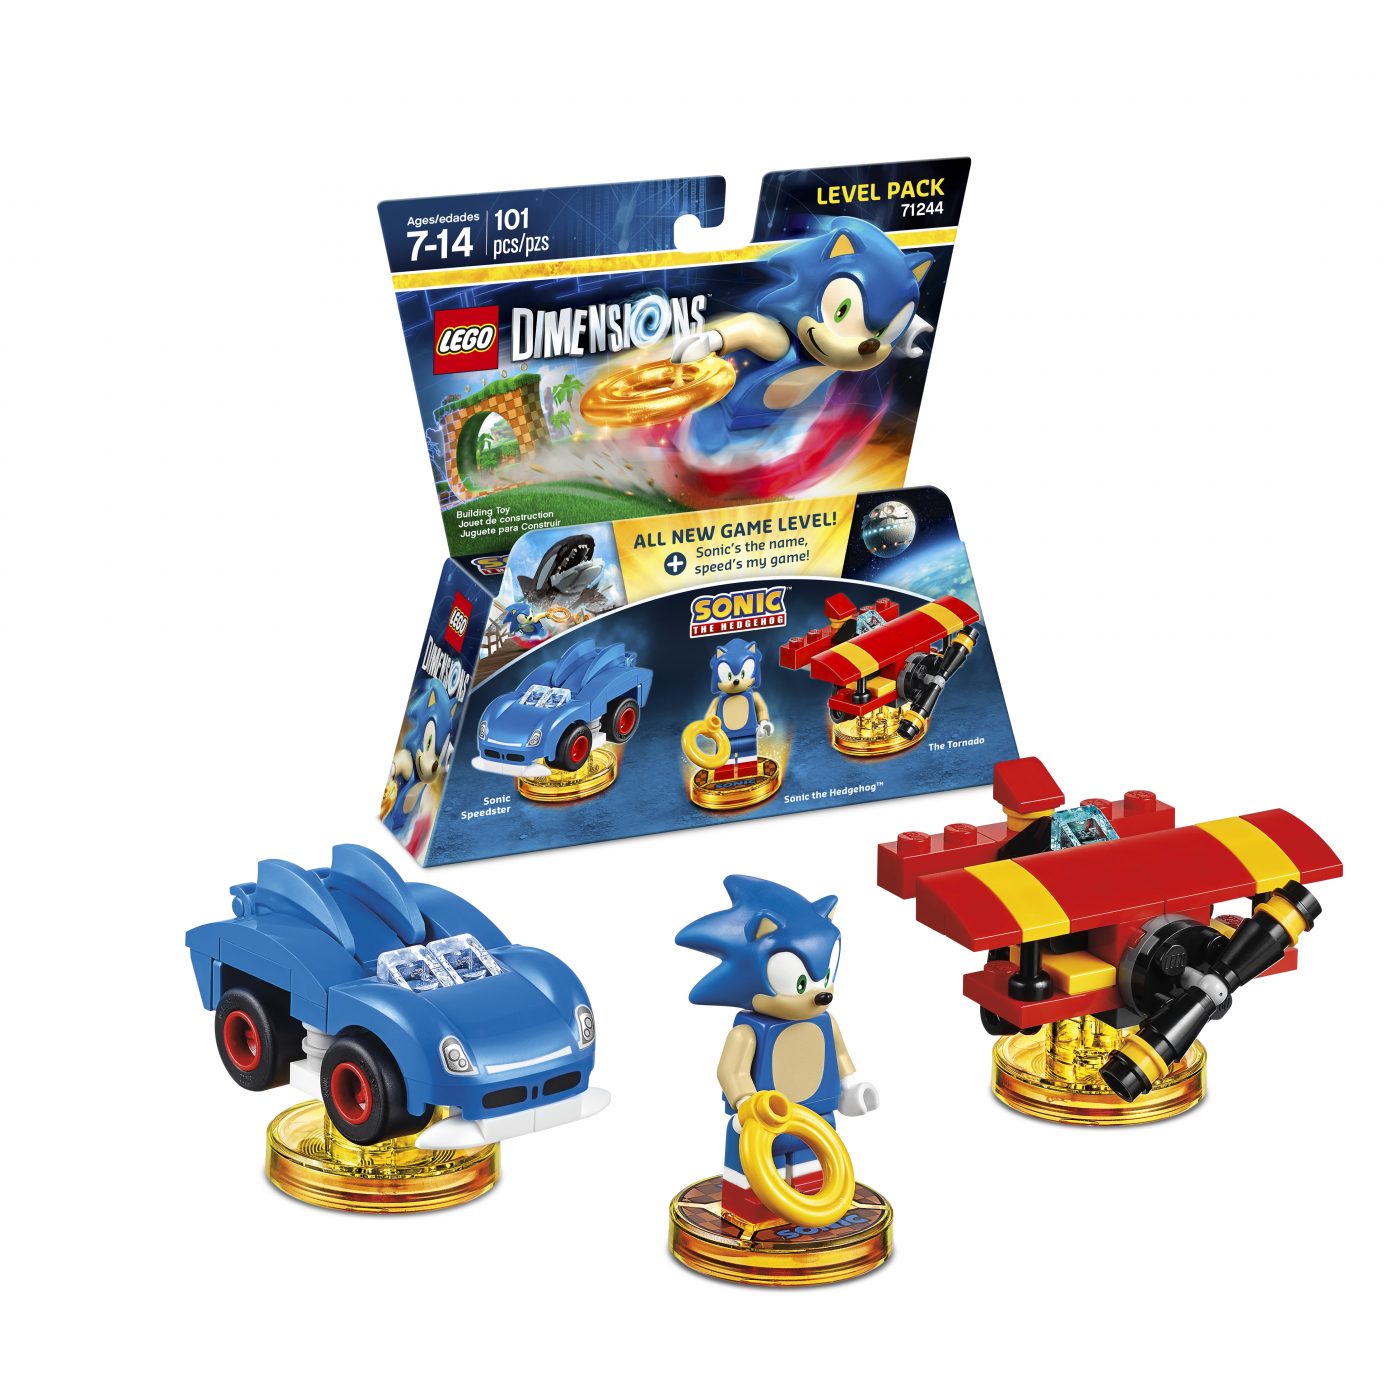 Sonic the Hedgehog Lego Ideas set will get official release - Polygon